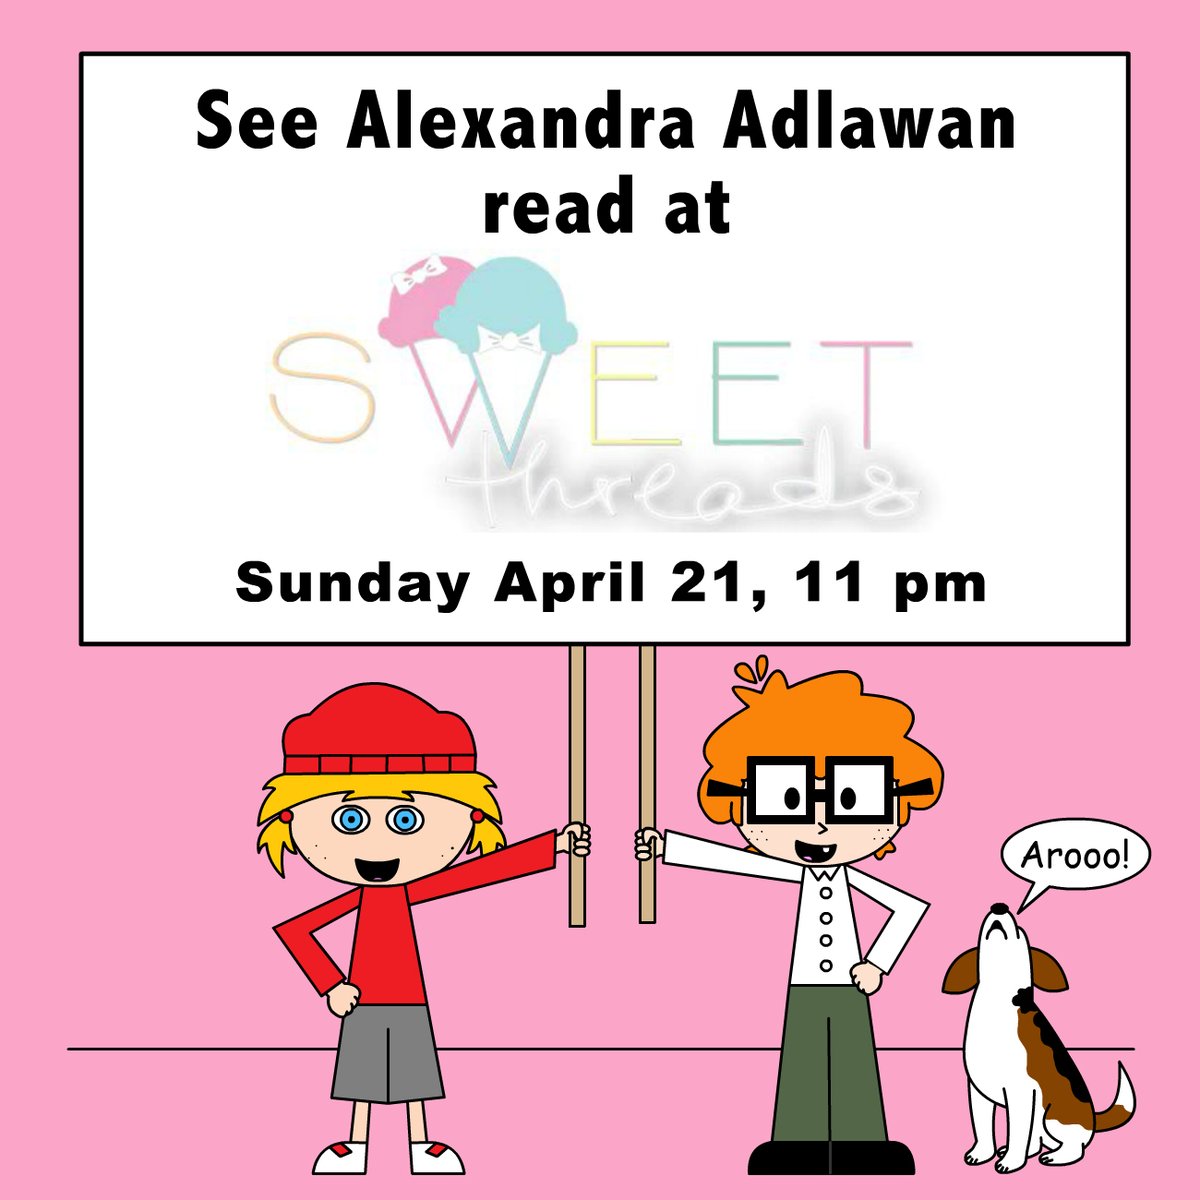 Come see me at Sweet Threads on Sunday, April 21, at 11:00 I’ll be reading my latest book, Sub Journey: The Adventures of Maddie & Albert, and giving a drawing lesson #shopsmallbusinesses #longbeach #MaddieandAlbert_SubJourney #maddieandalbert #childrensbooks #authorillustrator